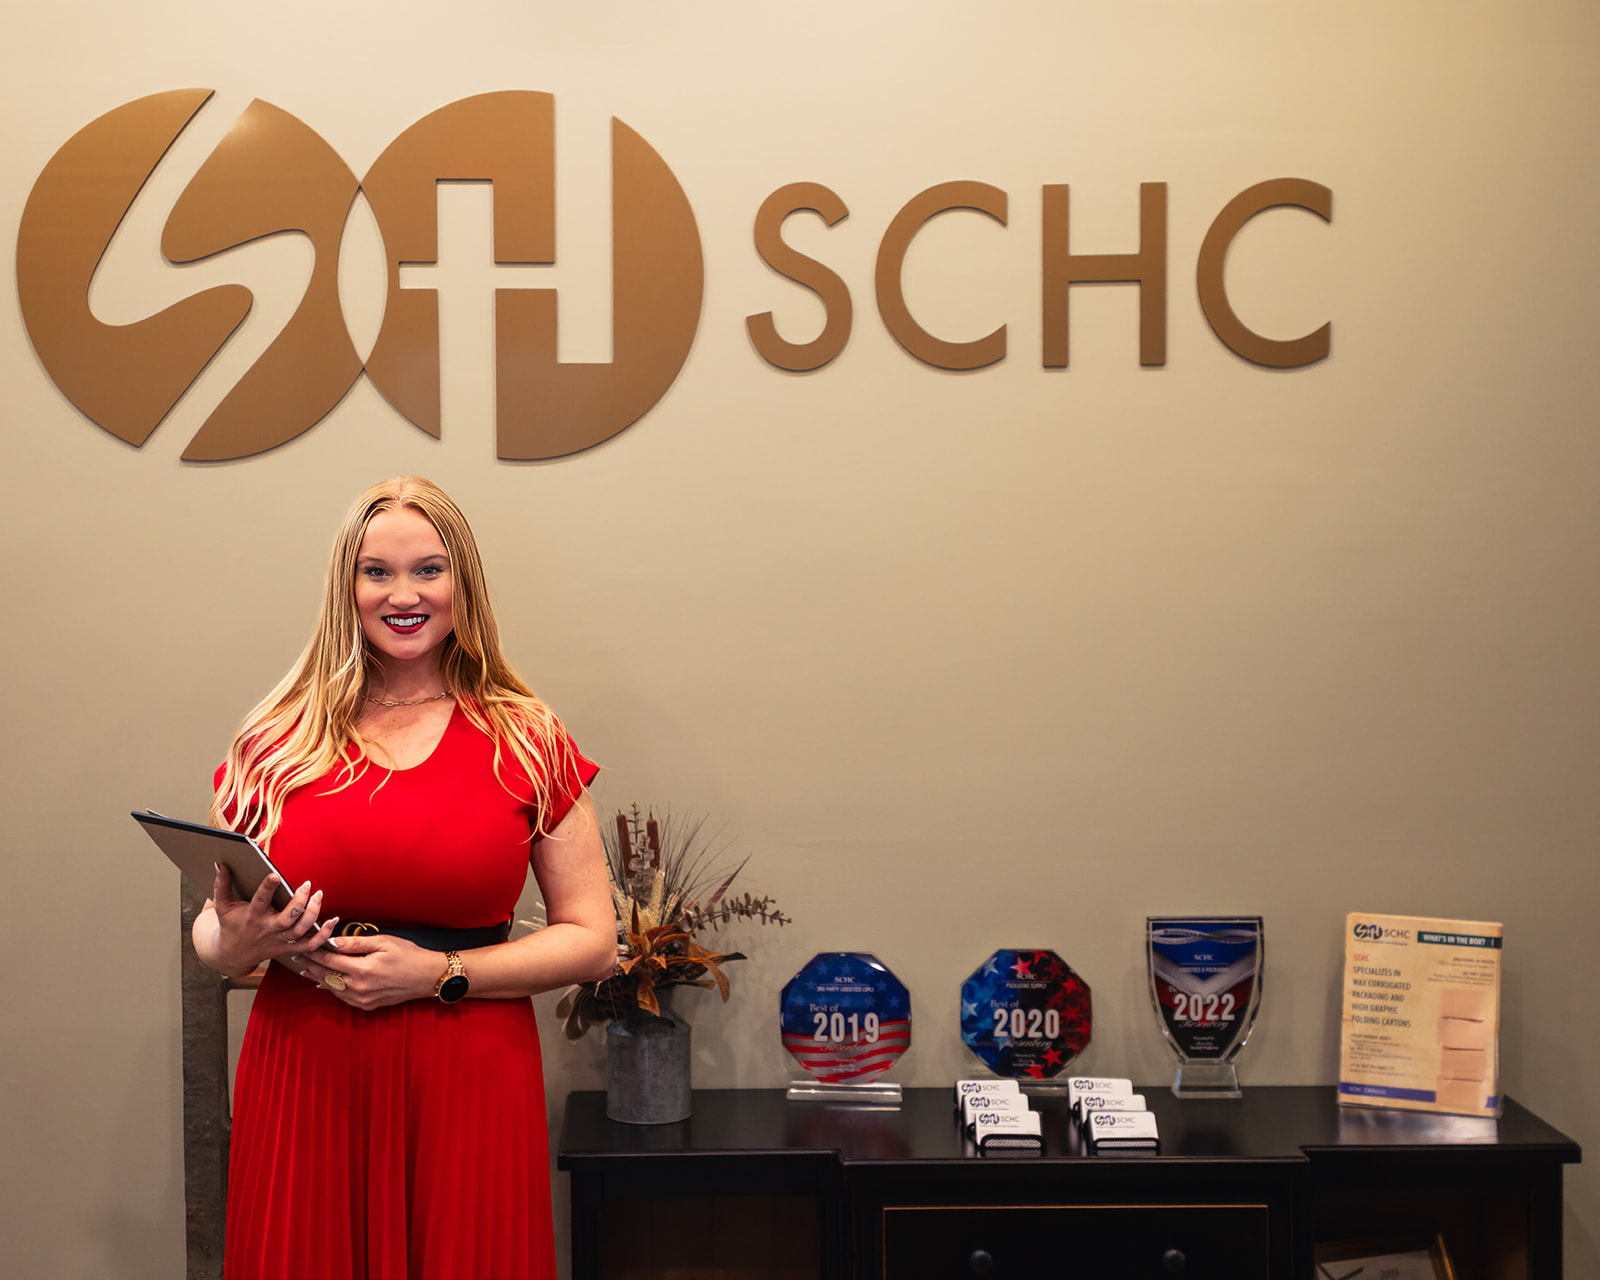 Woman in red dress holding tablet in front of company logo and awards.